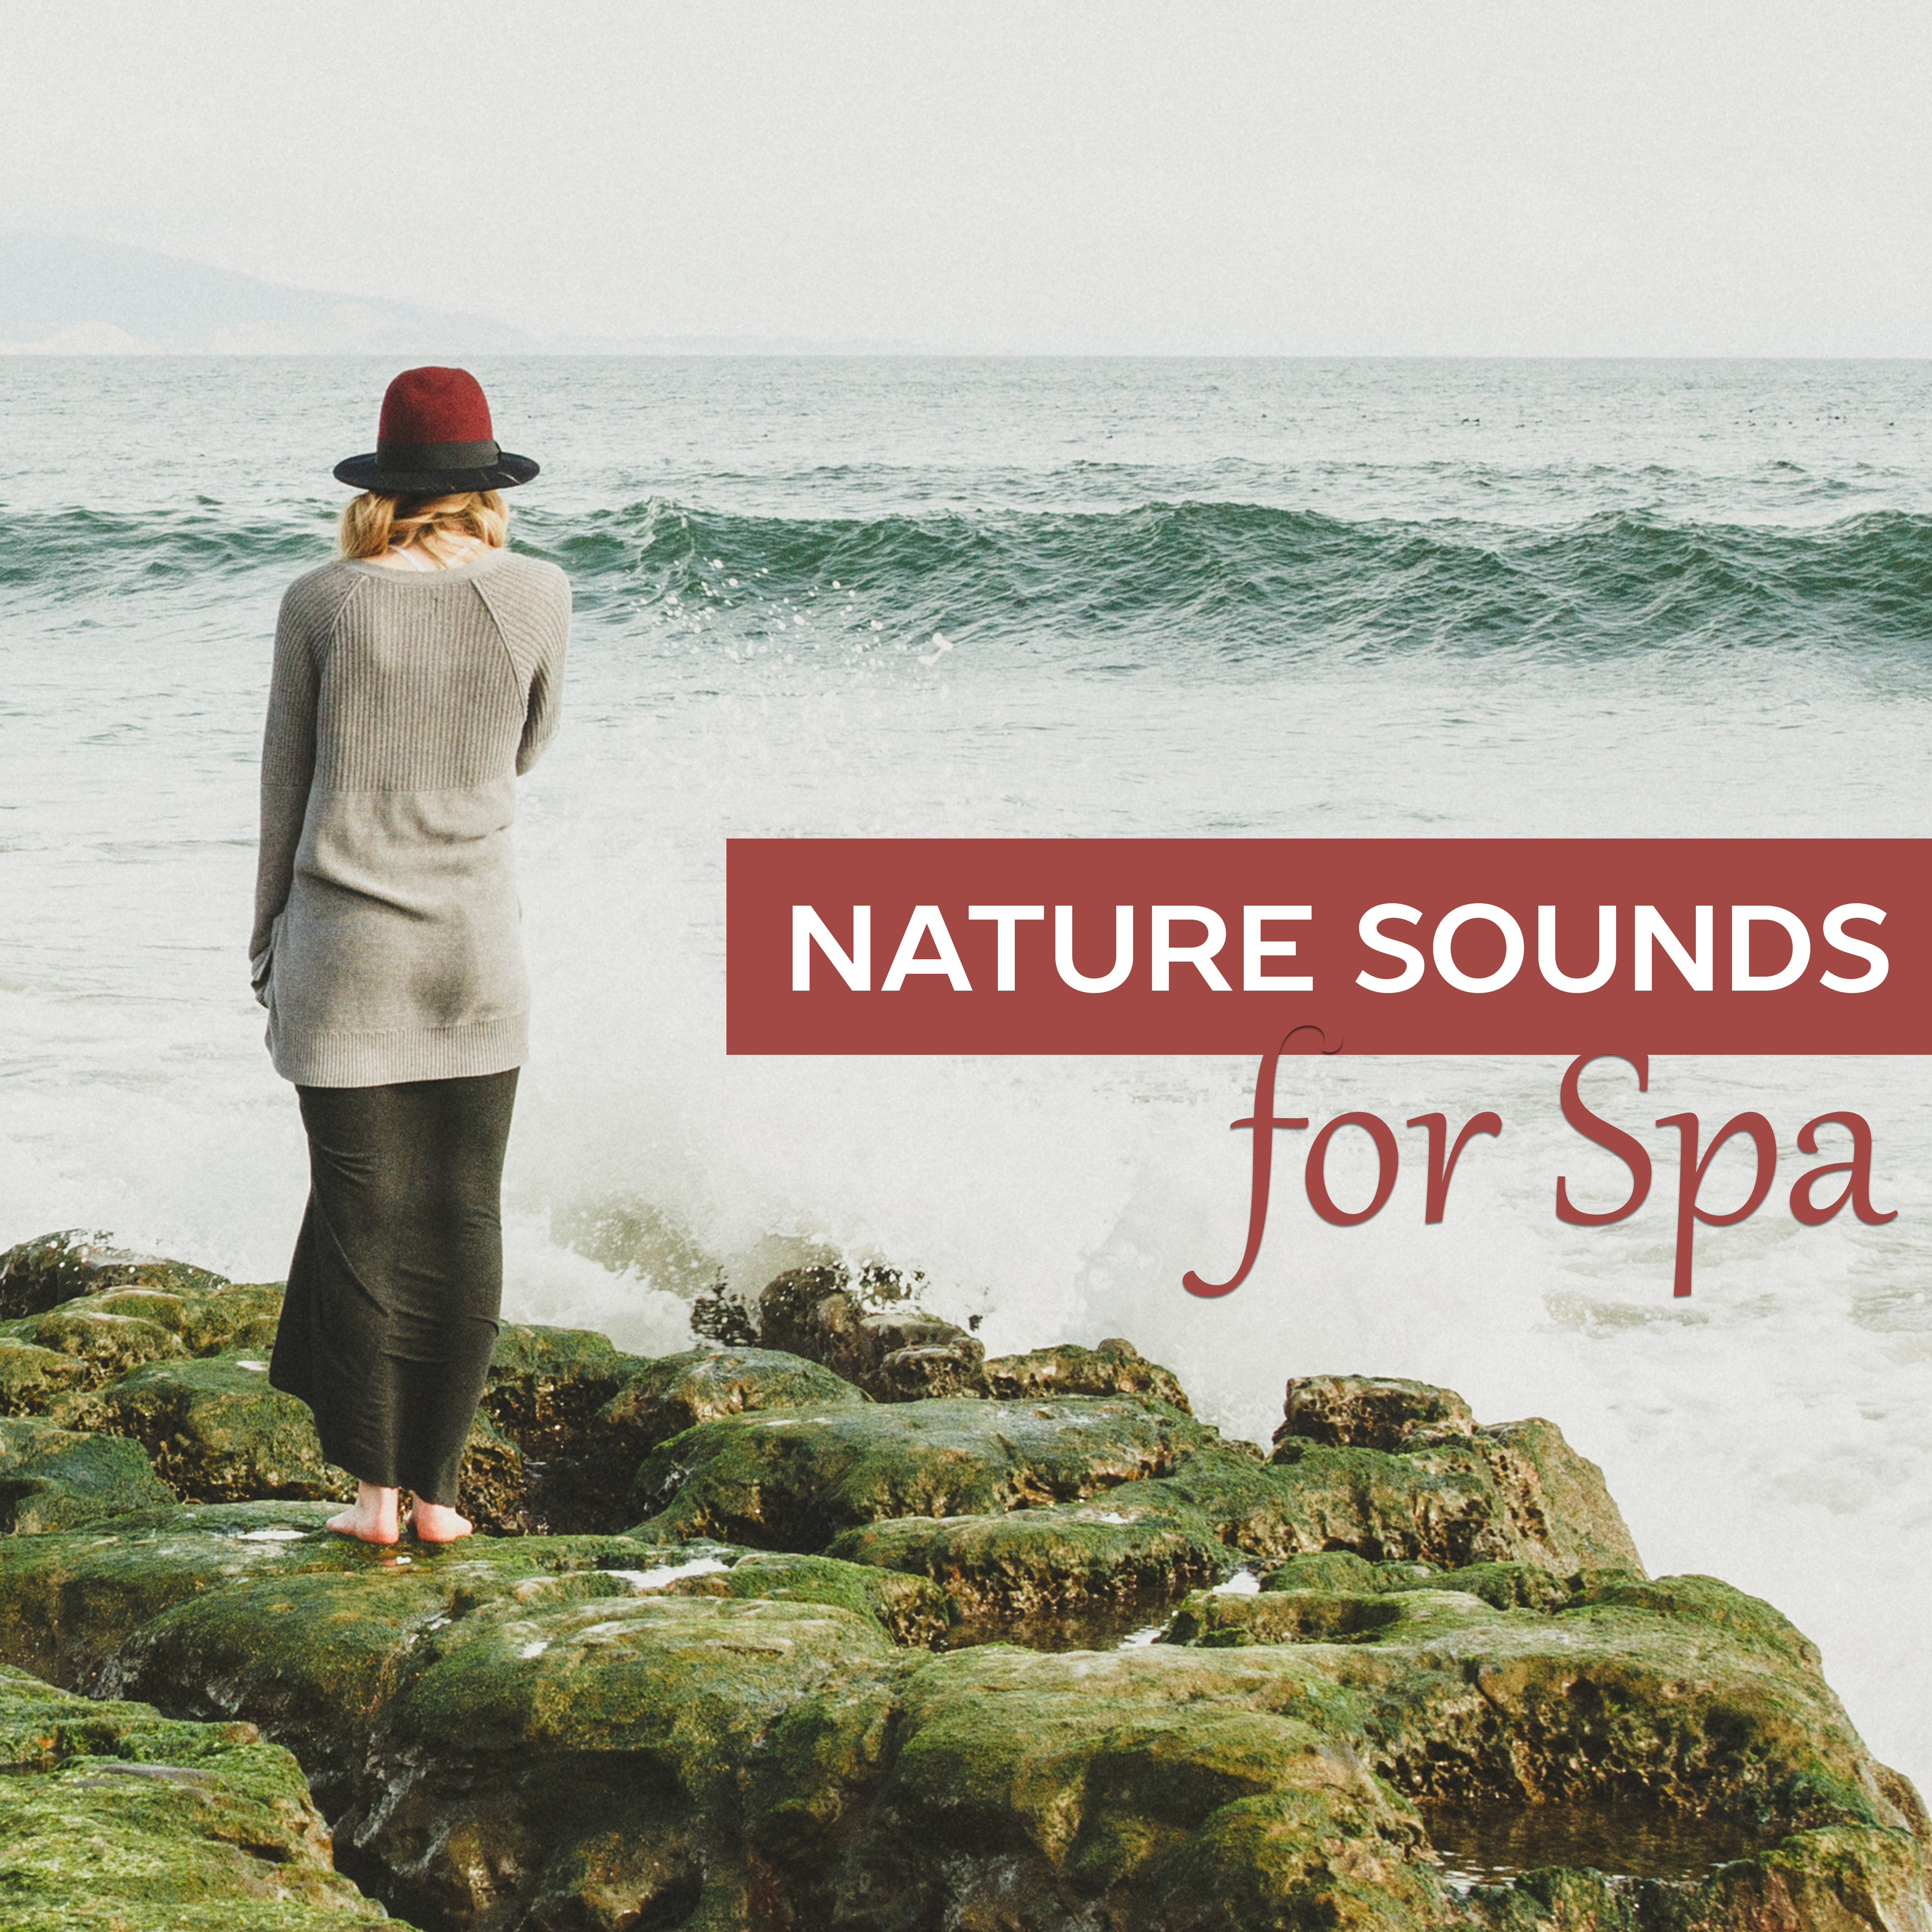 Nature Sounds for Spa – Relaxation Wellness, Music for Massage, Spa, Peaceful Mind, Soft Sounds to Rest, Zen, Soothing Piano, Relaxing Waves